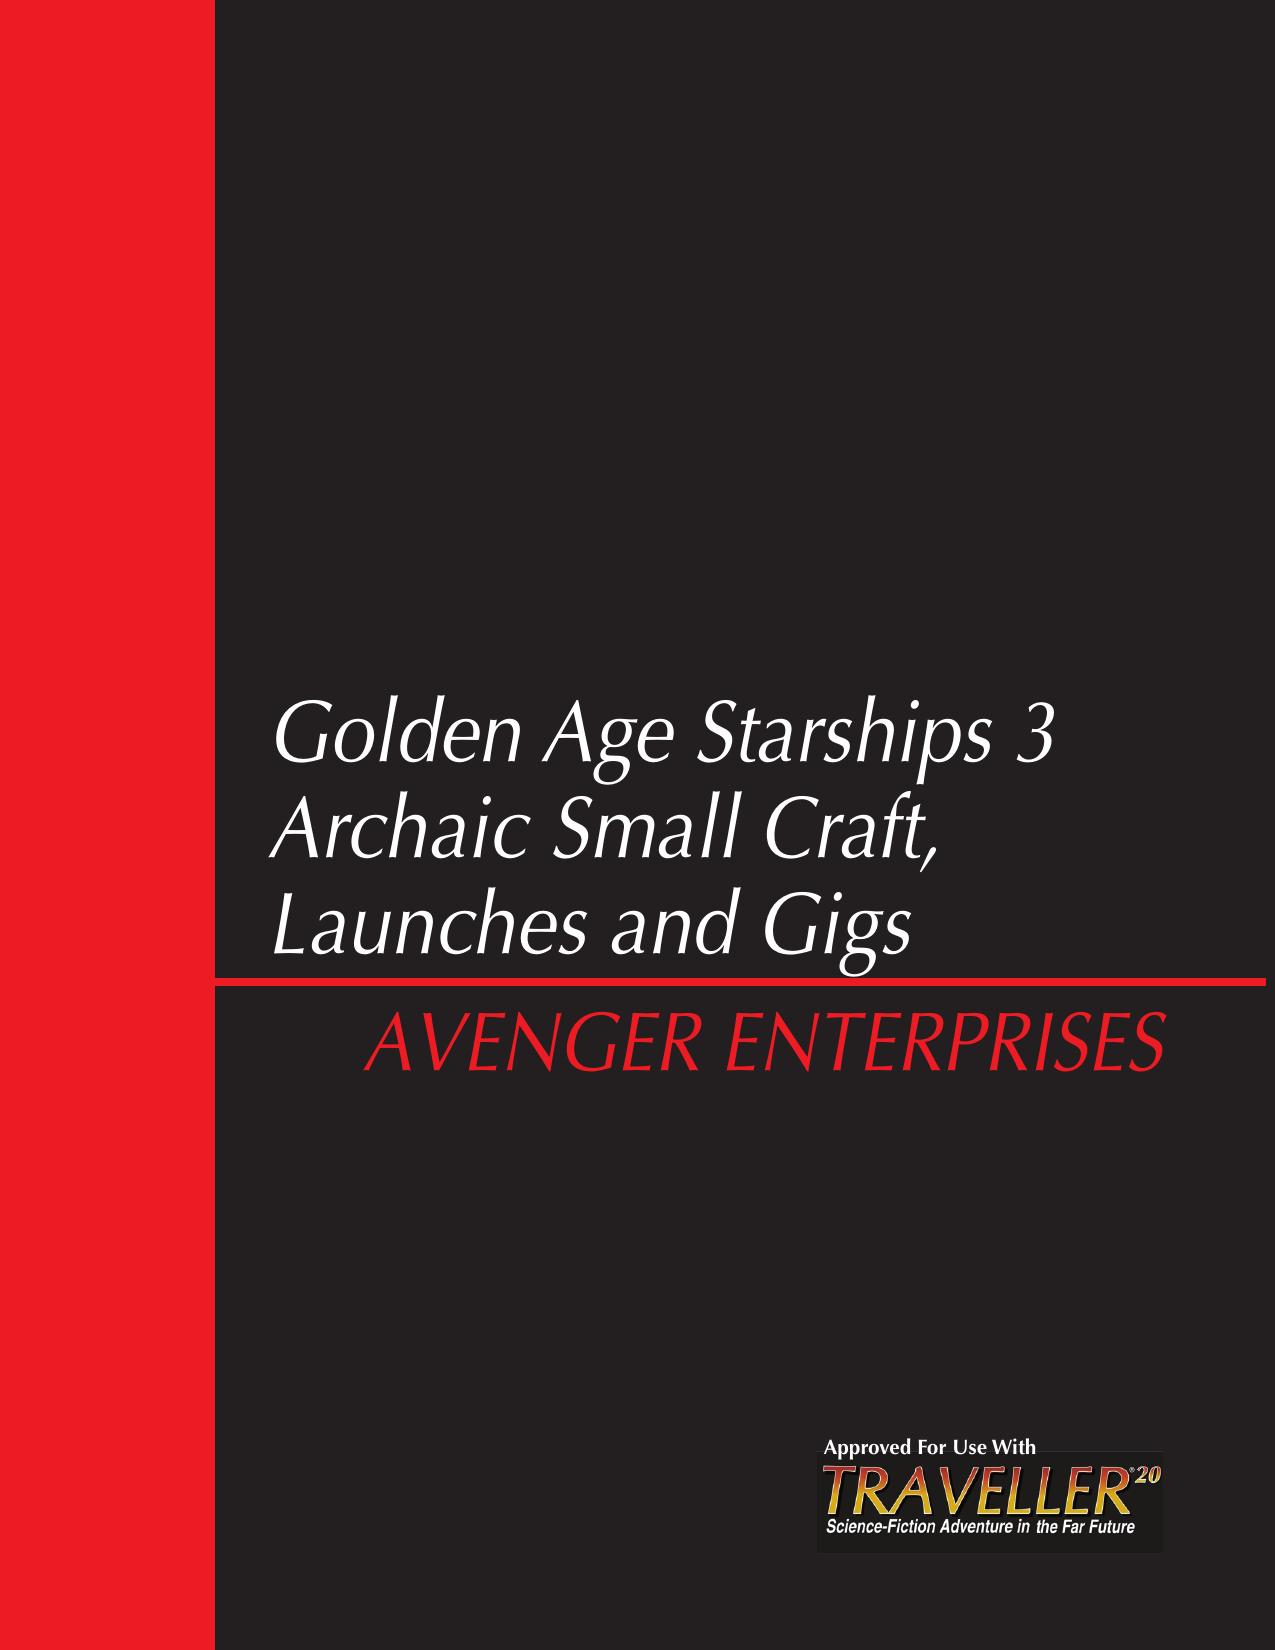 Archaic Small Craft, Launches & Gigs